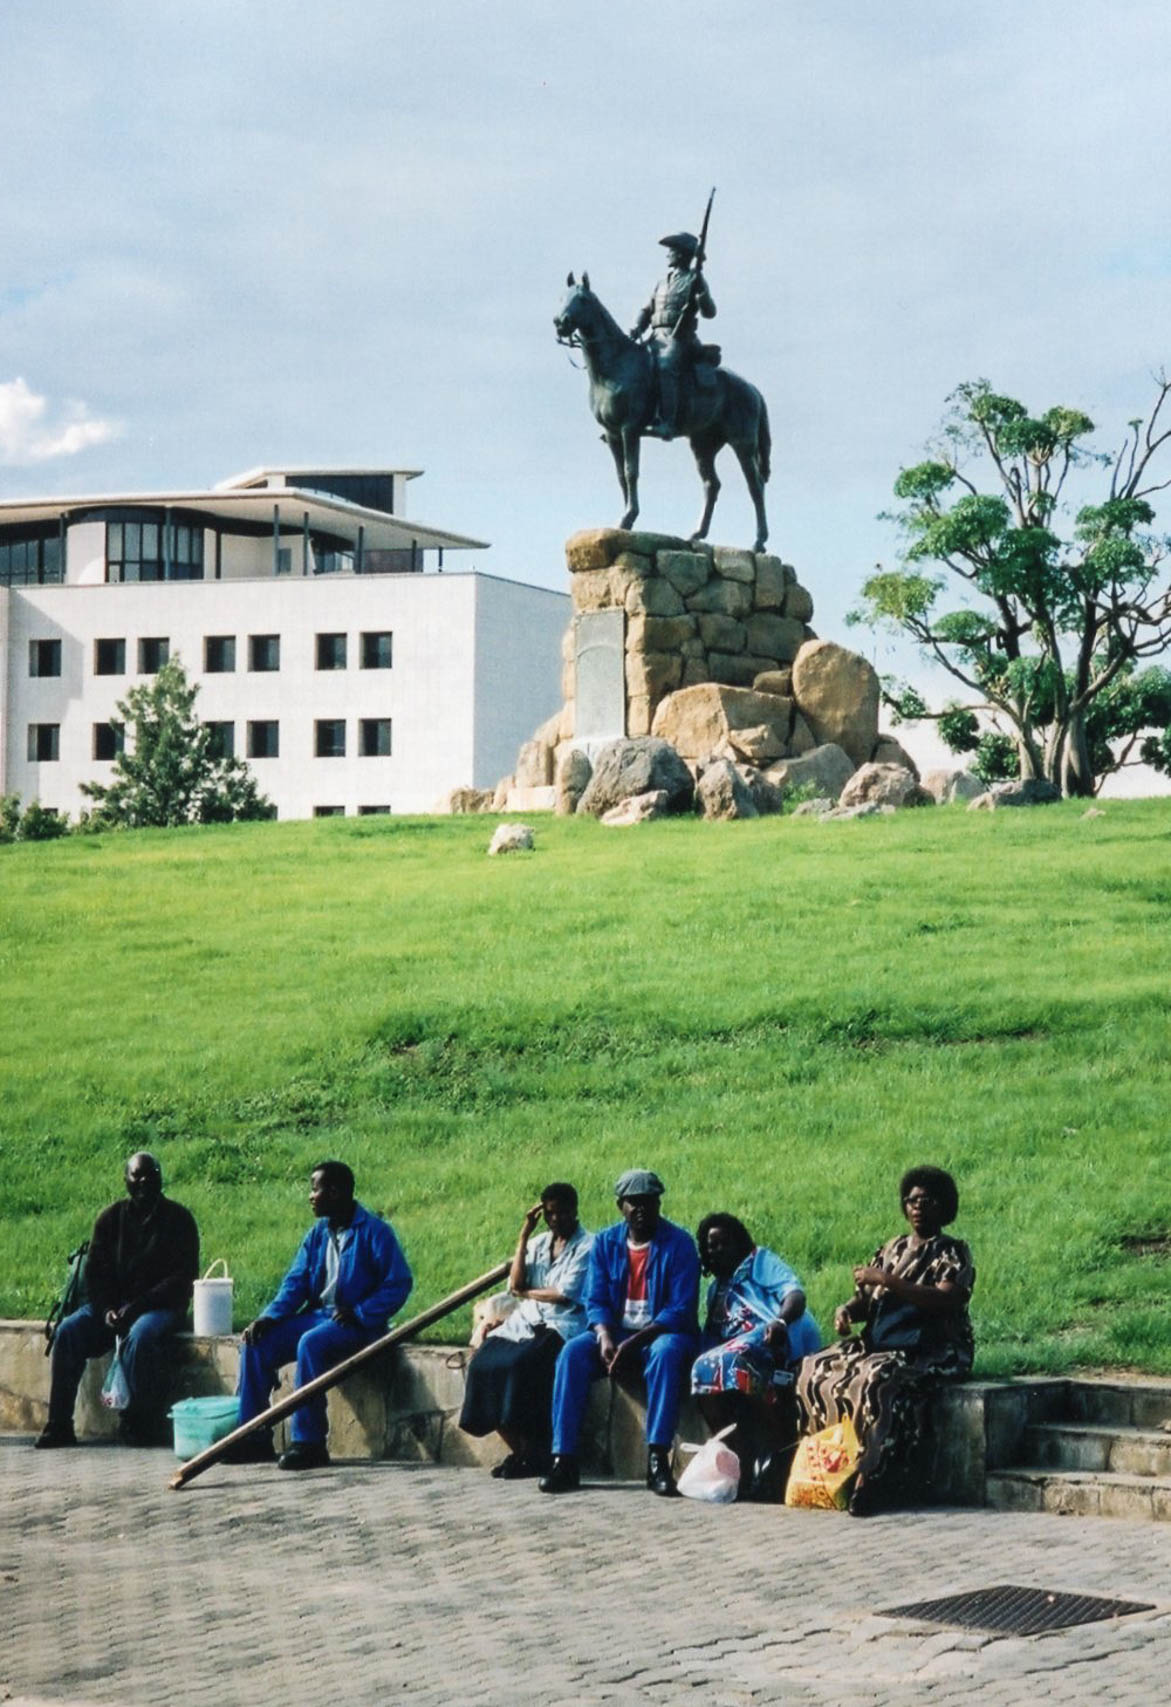 Do the people sitting on the curb in front of this statue know who the man on horseback was?